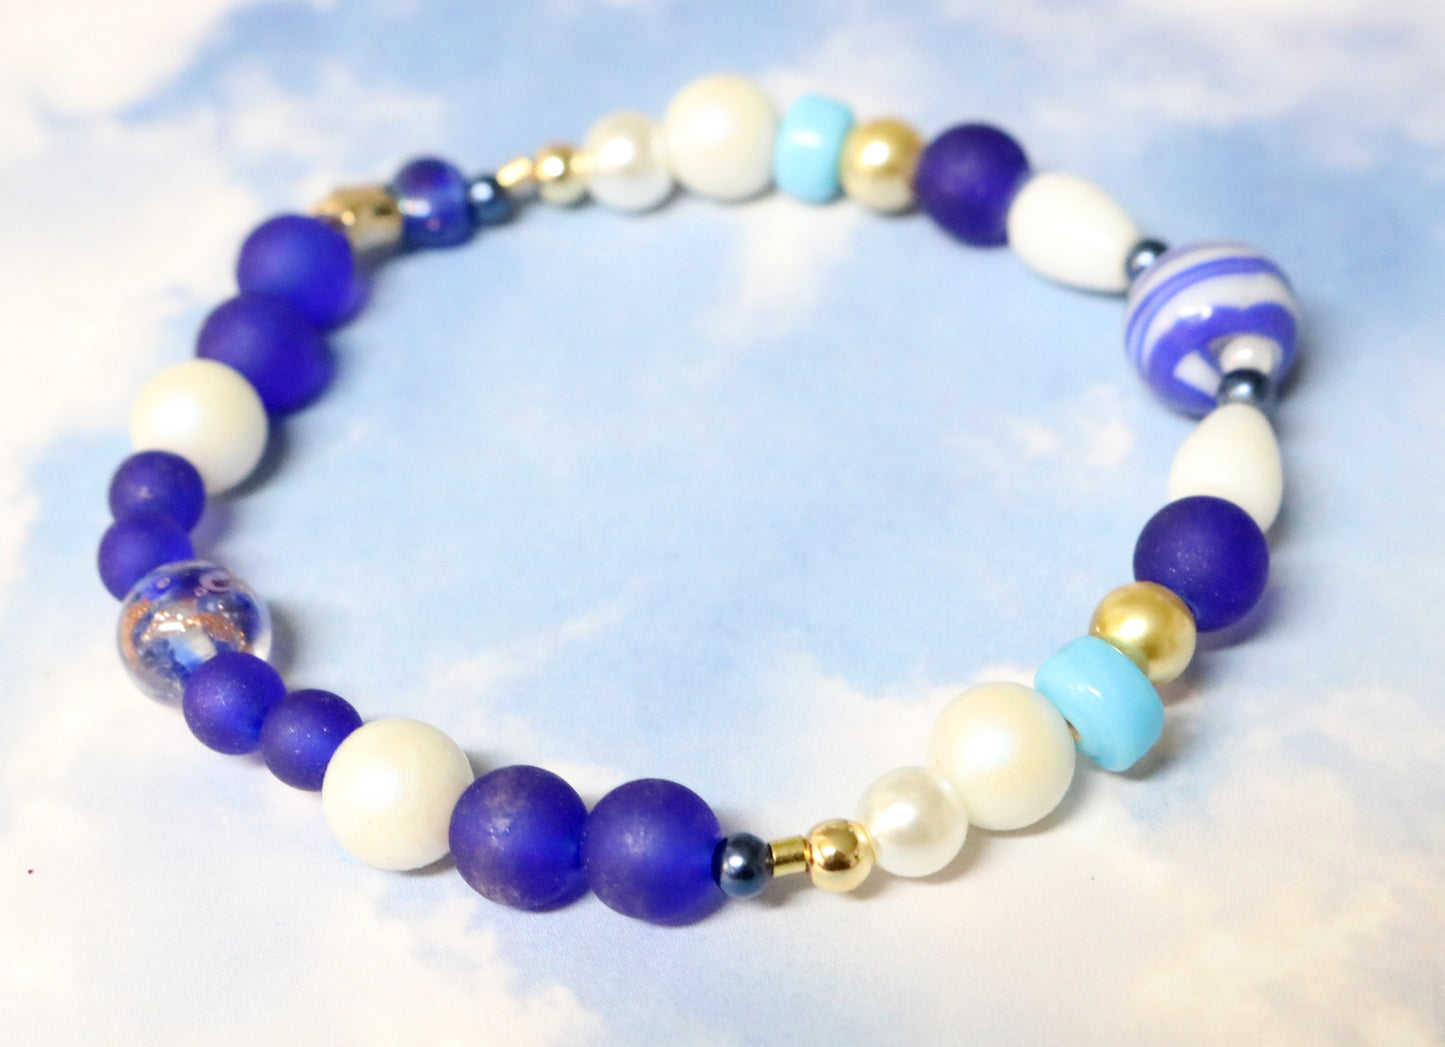 Your Grandmother's Blue and White China Inspired Handmade Artisan Bracelet by Monkey's Mojo